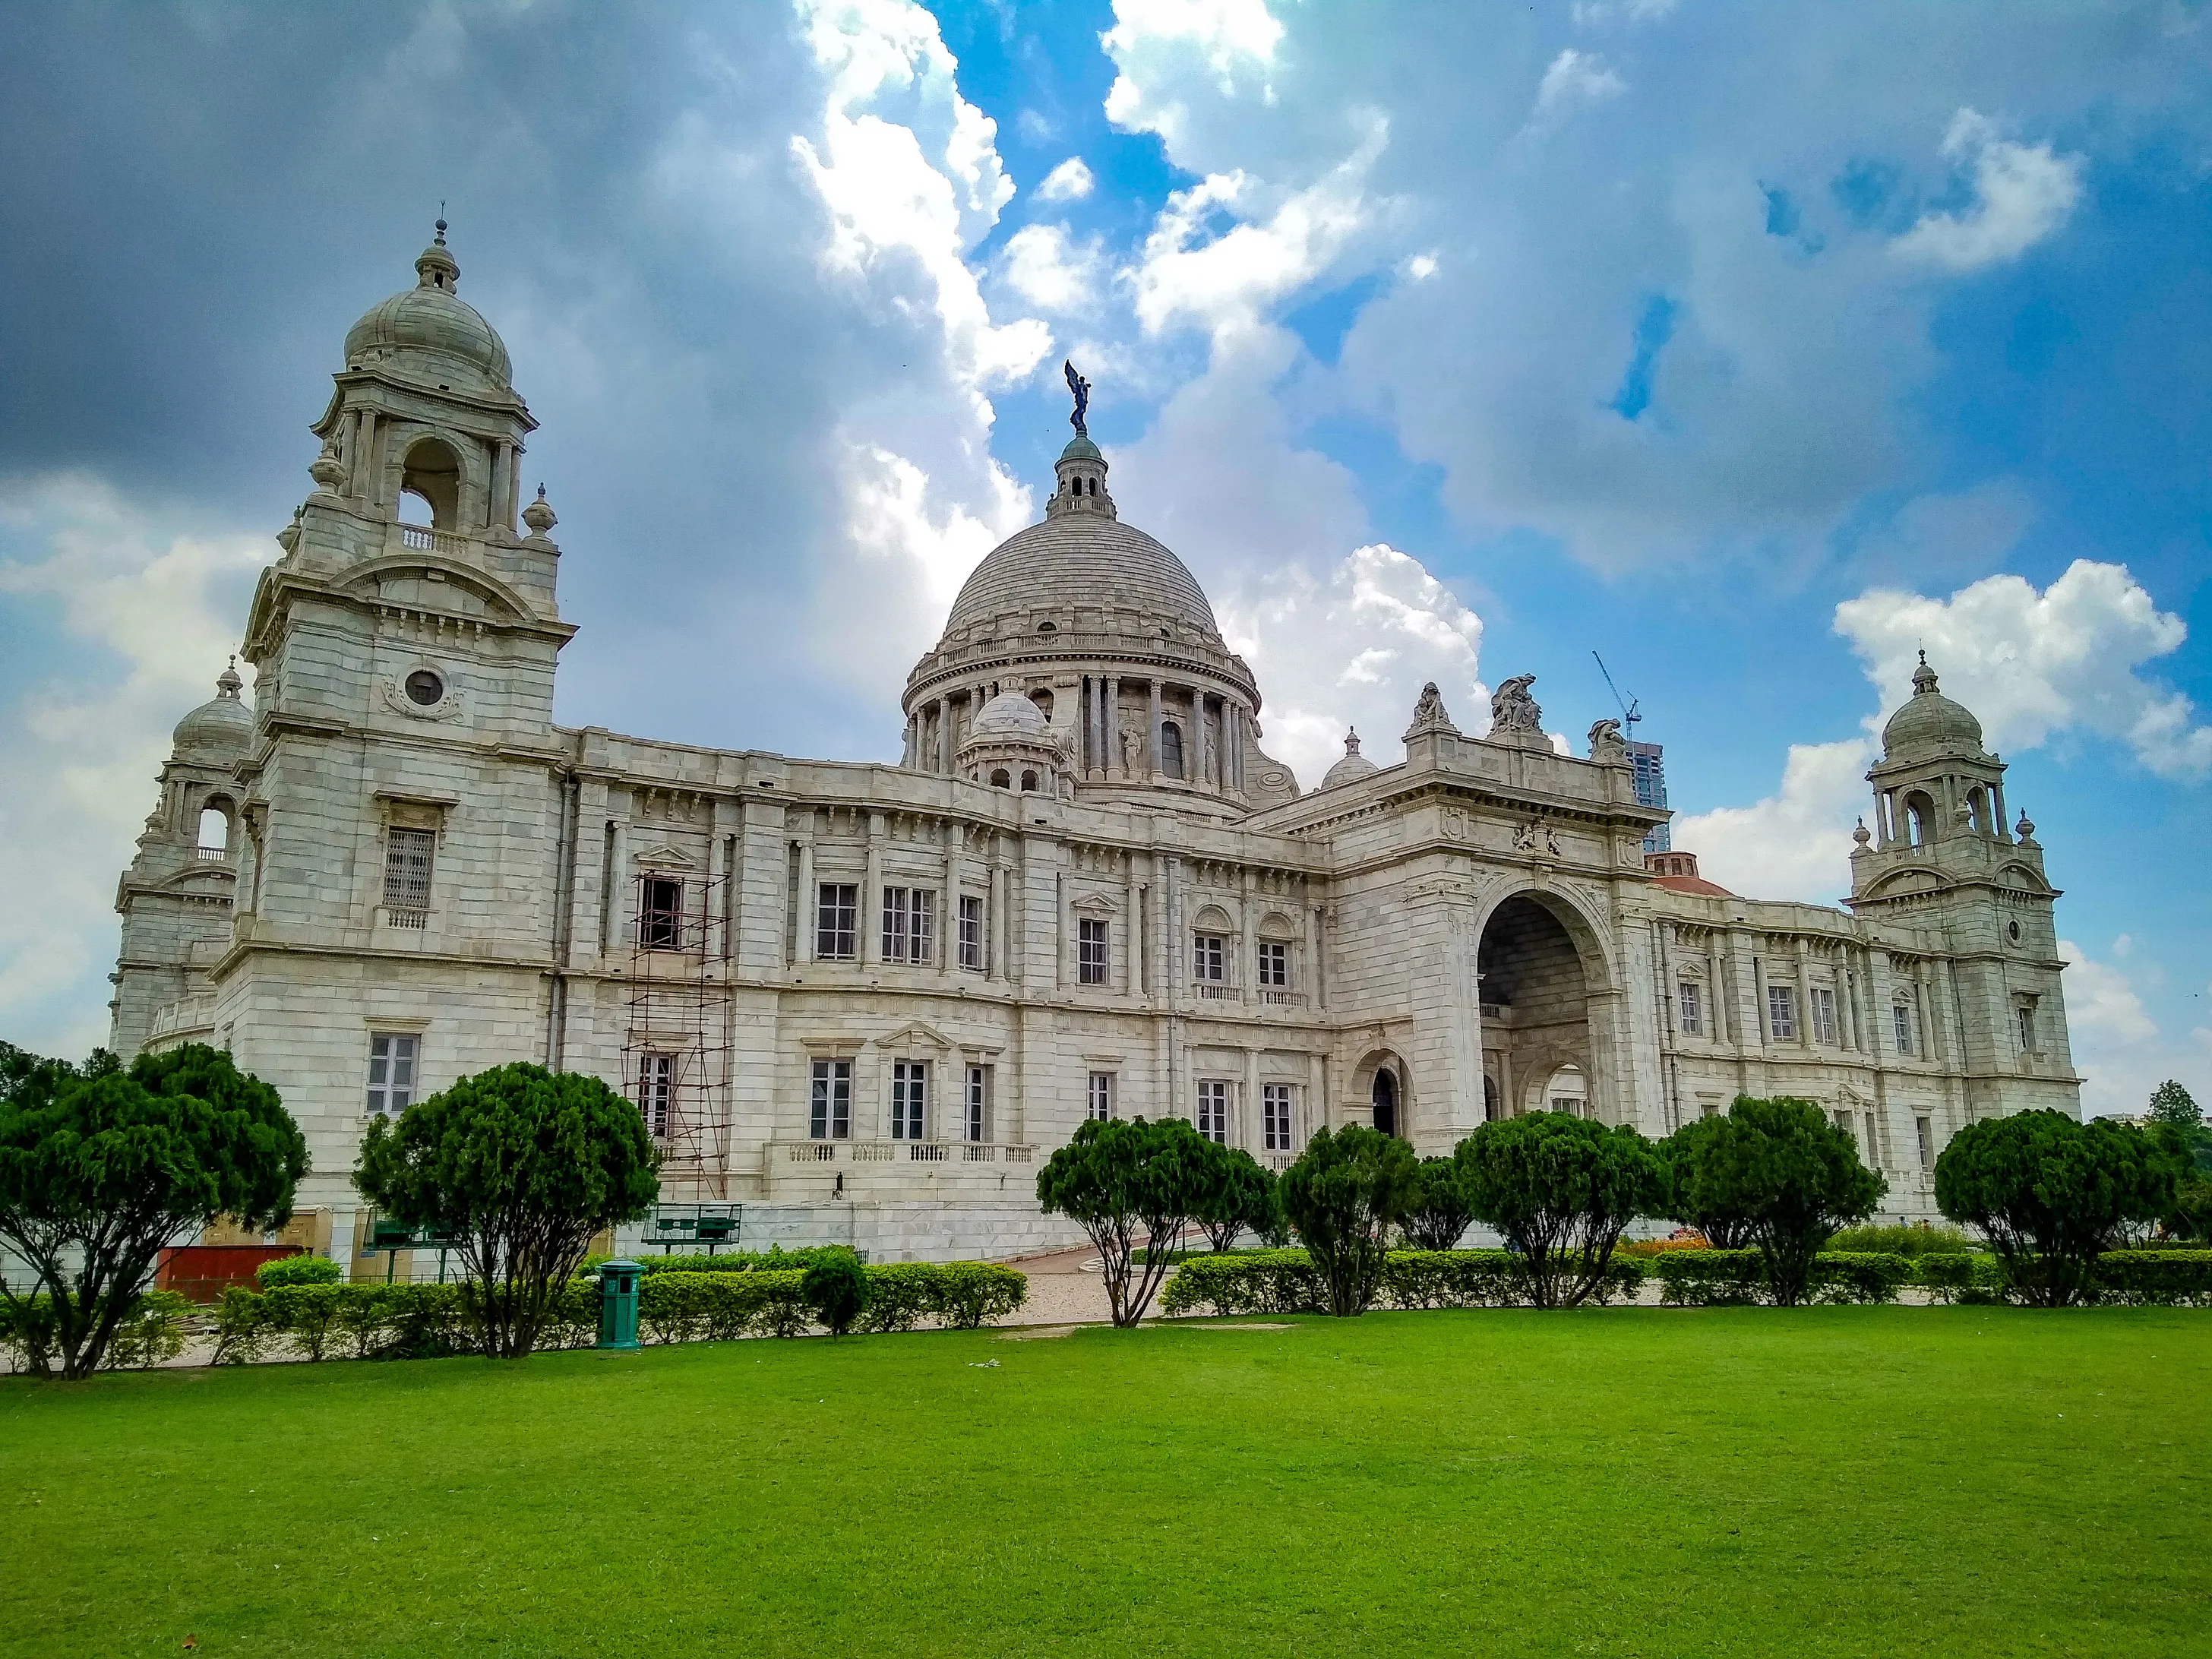 Things to do in Victoria memorial